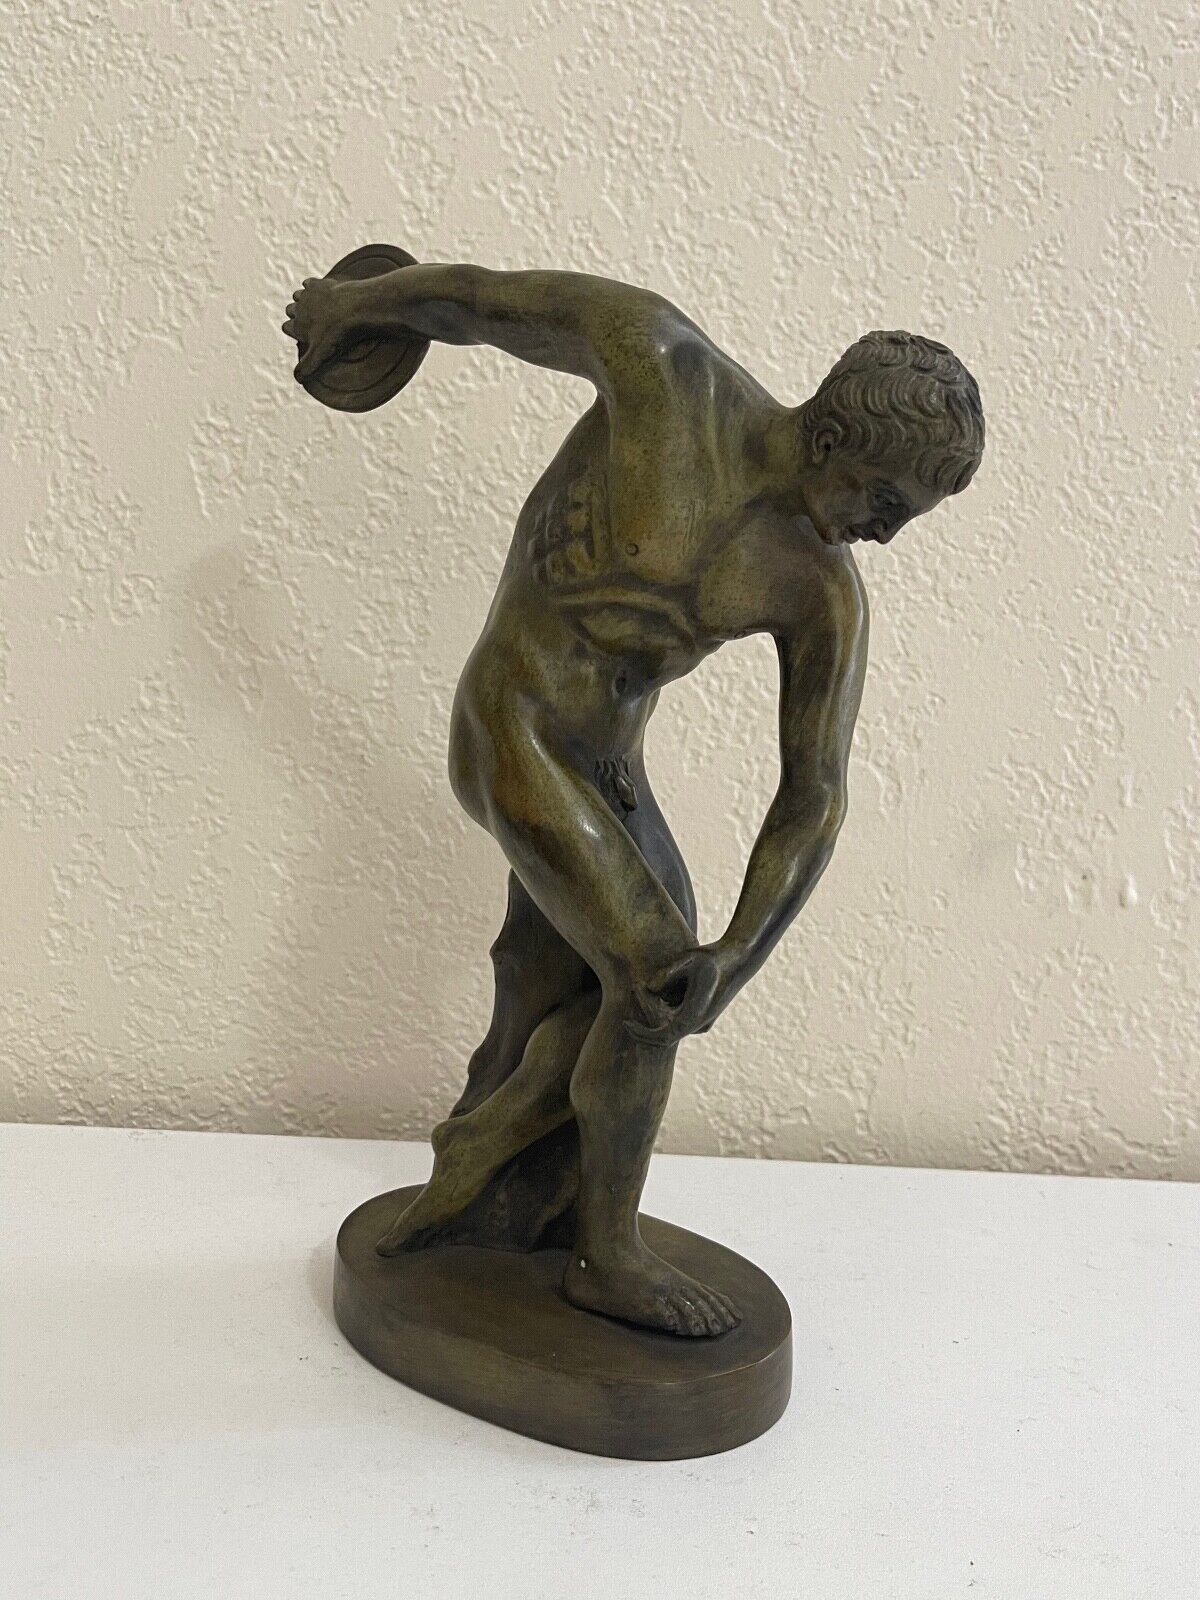 Vintage Bronze Discus Thrower After The Disobalus of Myron Sculpture Figurine